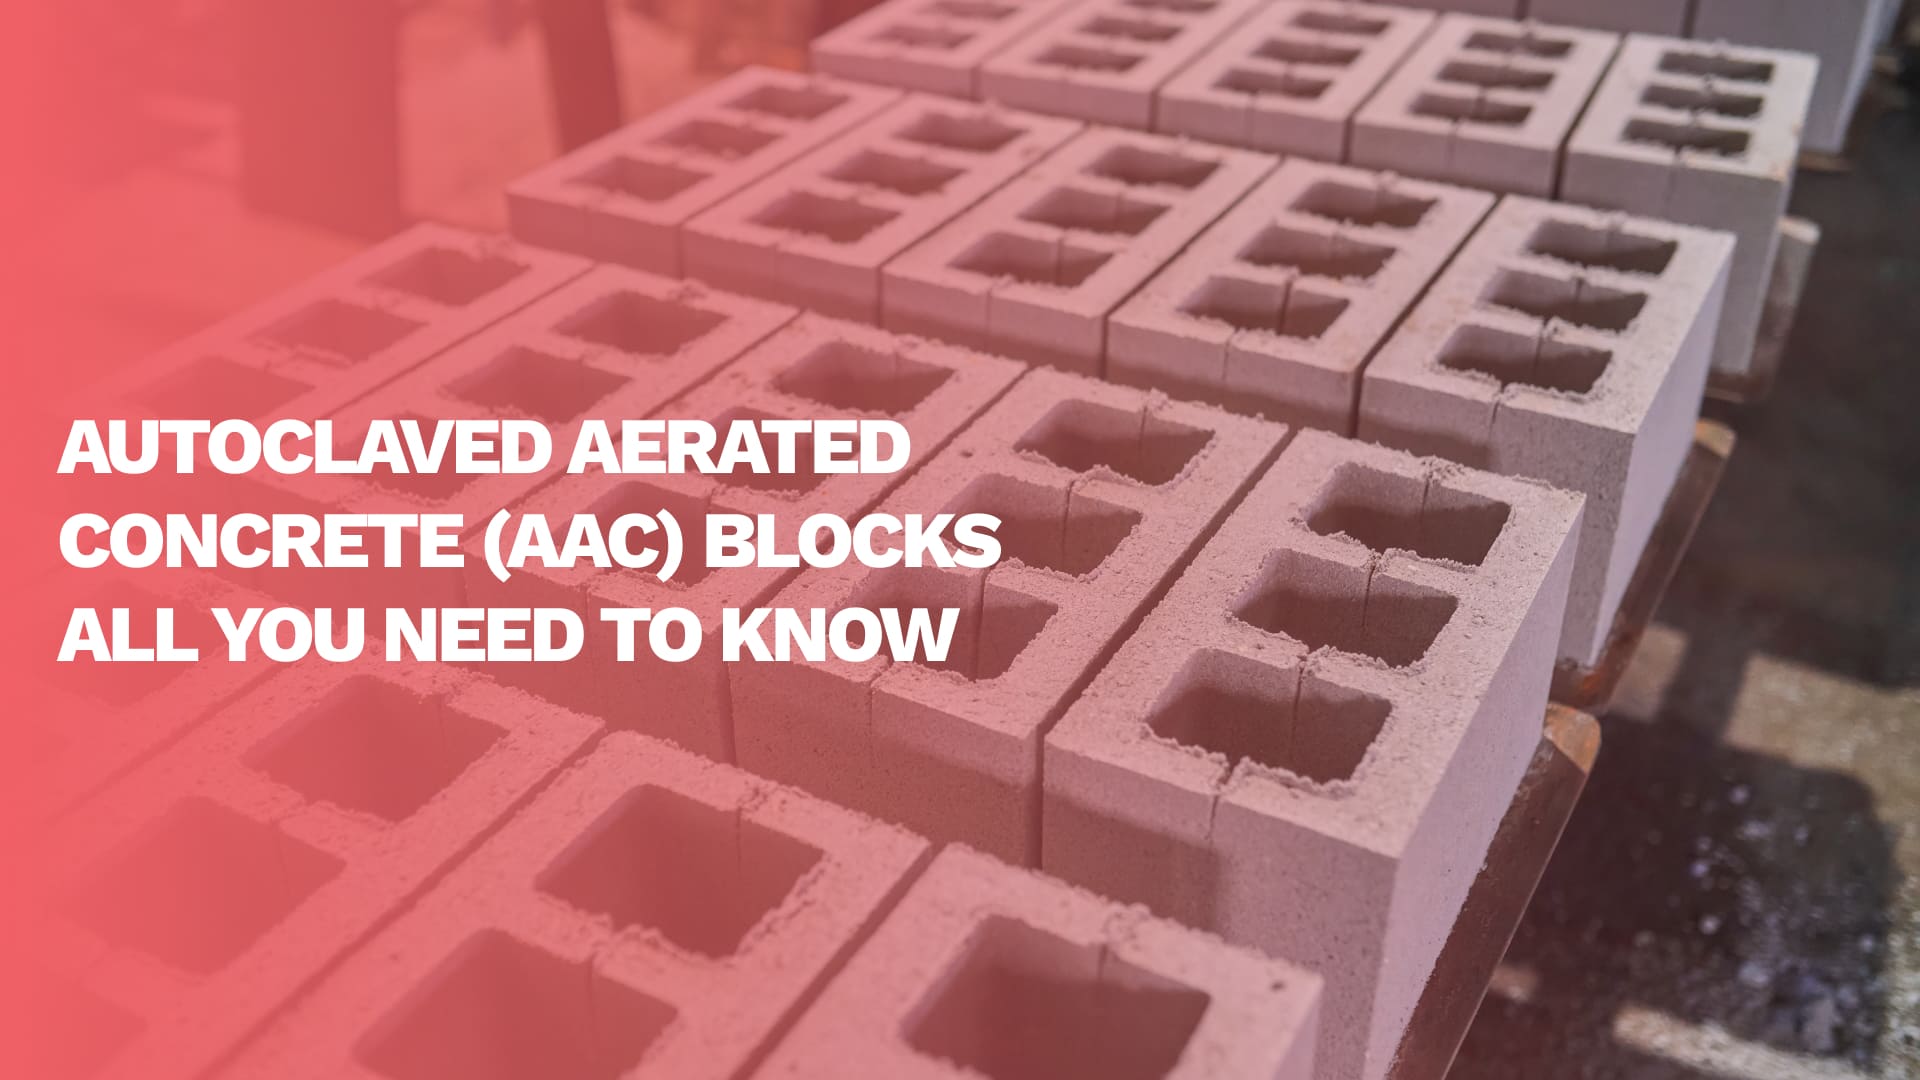 Autoclaved Aerated Concrete (AAC) Blocks: All you Need to know